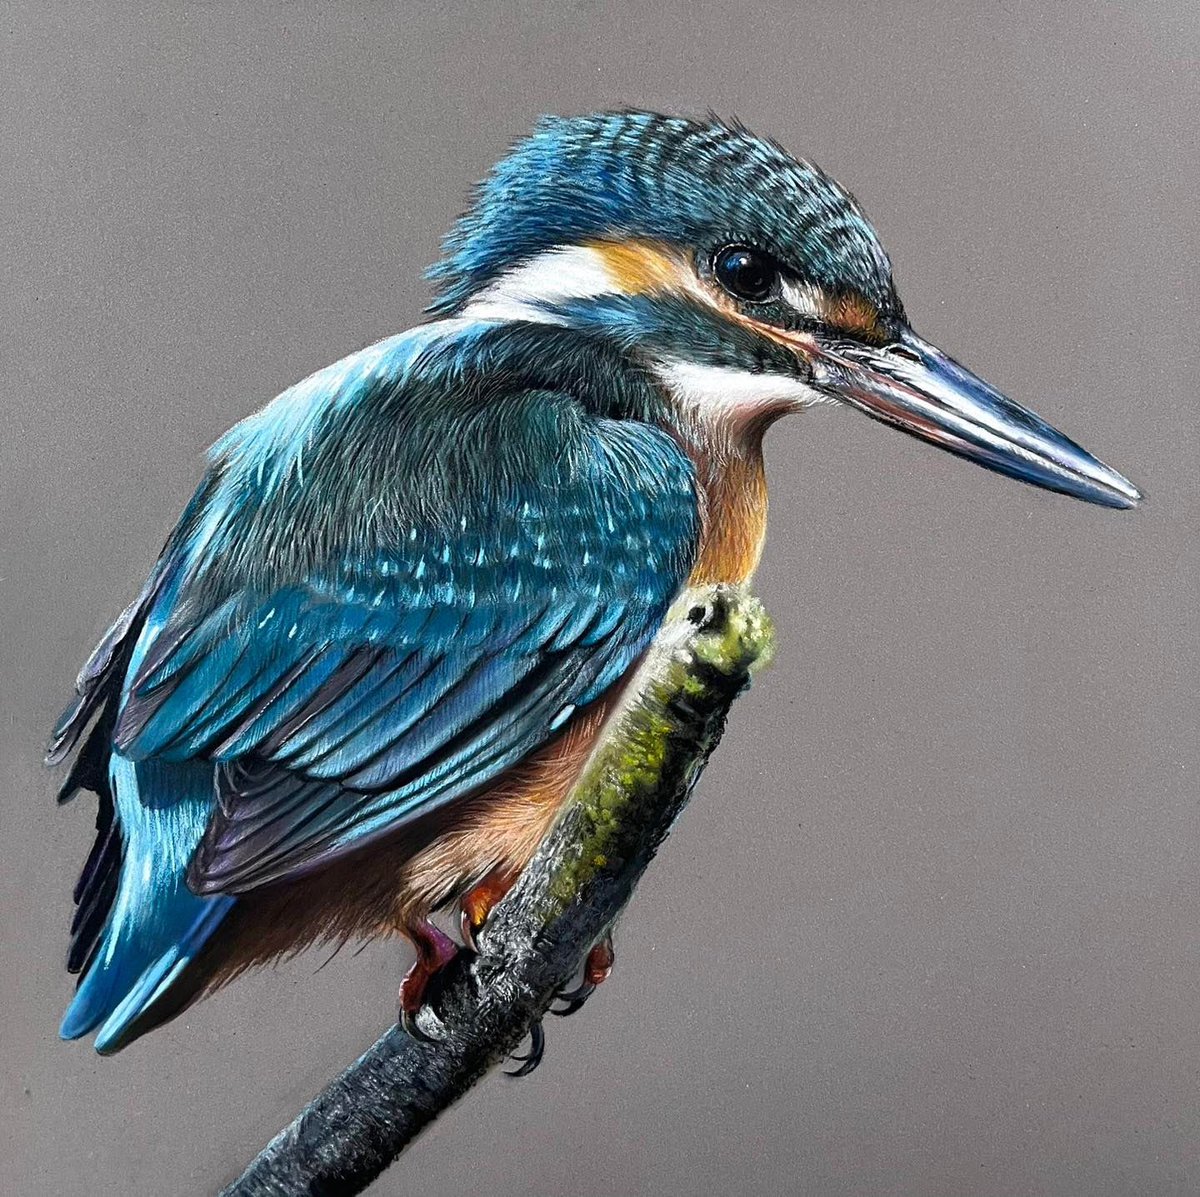 Possibly my favourite piece to date. Awesome animals to draw. Pastel pencils and soft pastel on pastelmat. Hope everyone has a great weekend 🙂.
#art #drawing #artistry #kingfisher #drawing #hyperrealism #artists #birds #draw #paint #pencils #pencilart #artofdrawing #artsy #arty